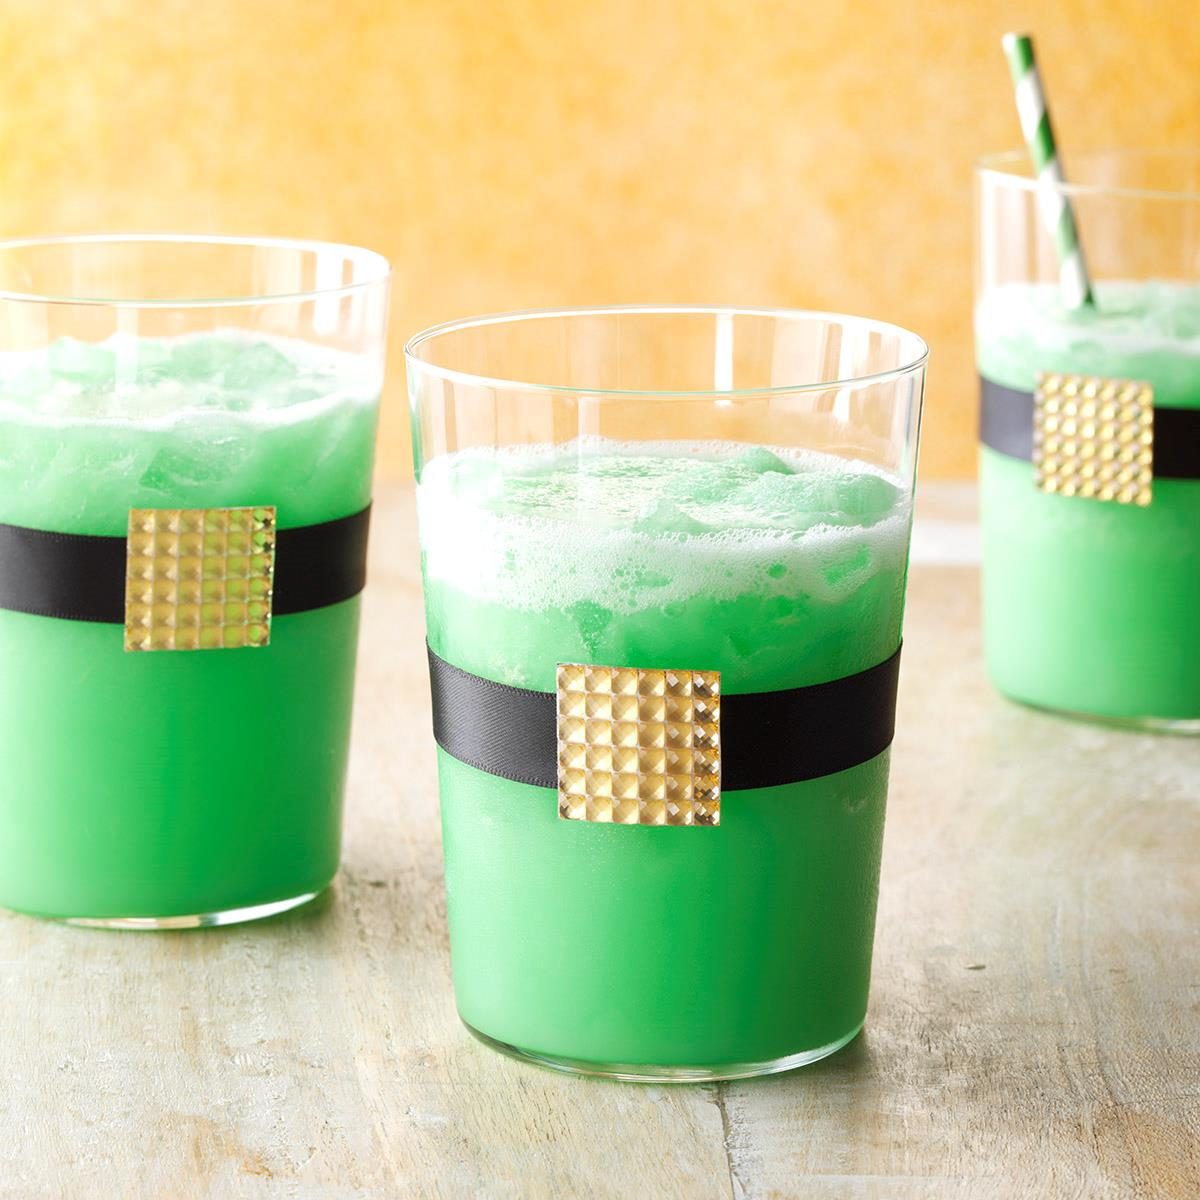 <p>You won't need the help of lucky little elves to ready this refreshing lime concoction. Cheery garnishes can be fixed in a wink to dress up each guest's glass. —Taste of Home Test Kitchen, Milwaukee, Wisconsin</p> <div class="listicle-page__buttons"> <div class="listicle-page__cta-button"><a href='https://www.tasteofhome.com/recipes/leprechaun-lime-drink/'>Go to Recipe</a></div> </div>